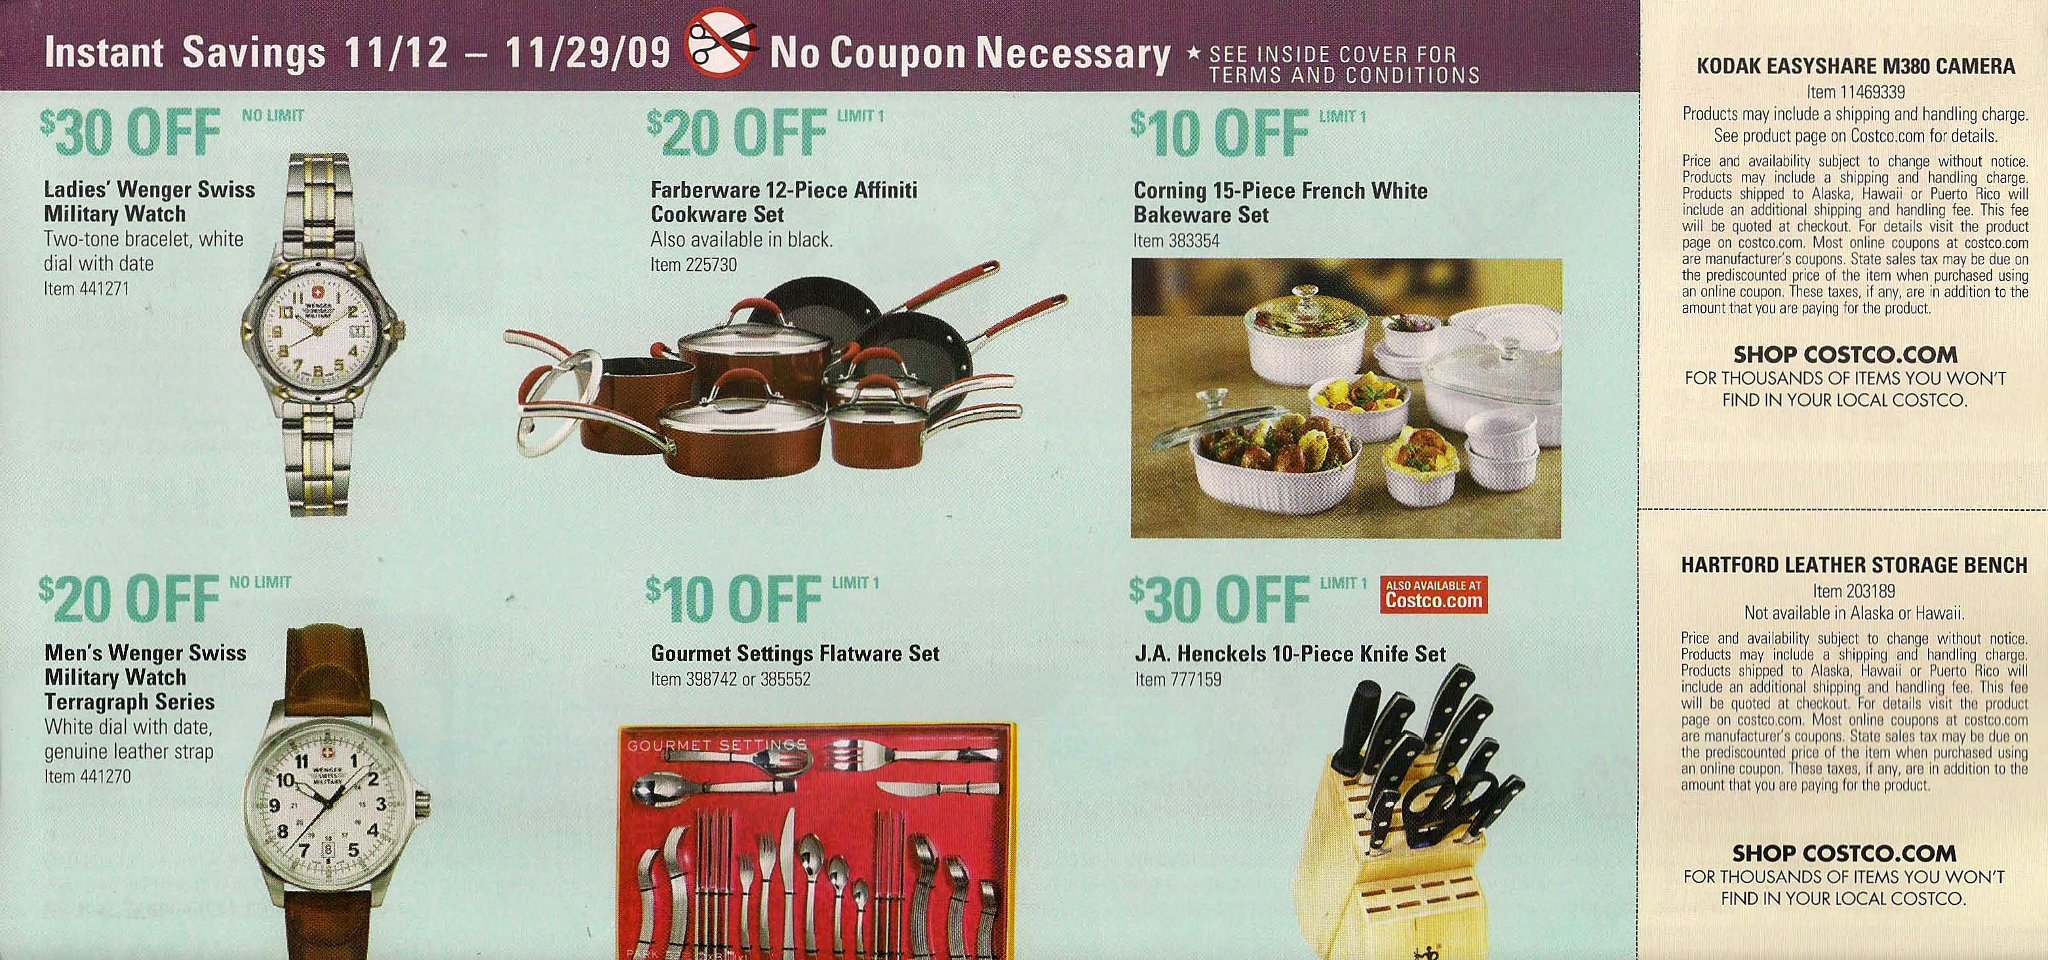 Coupon book page 10 in full-size.